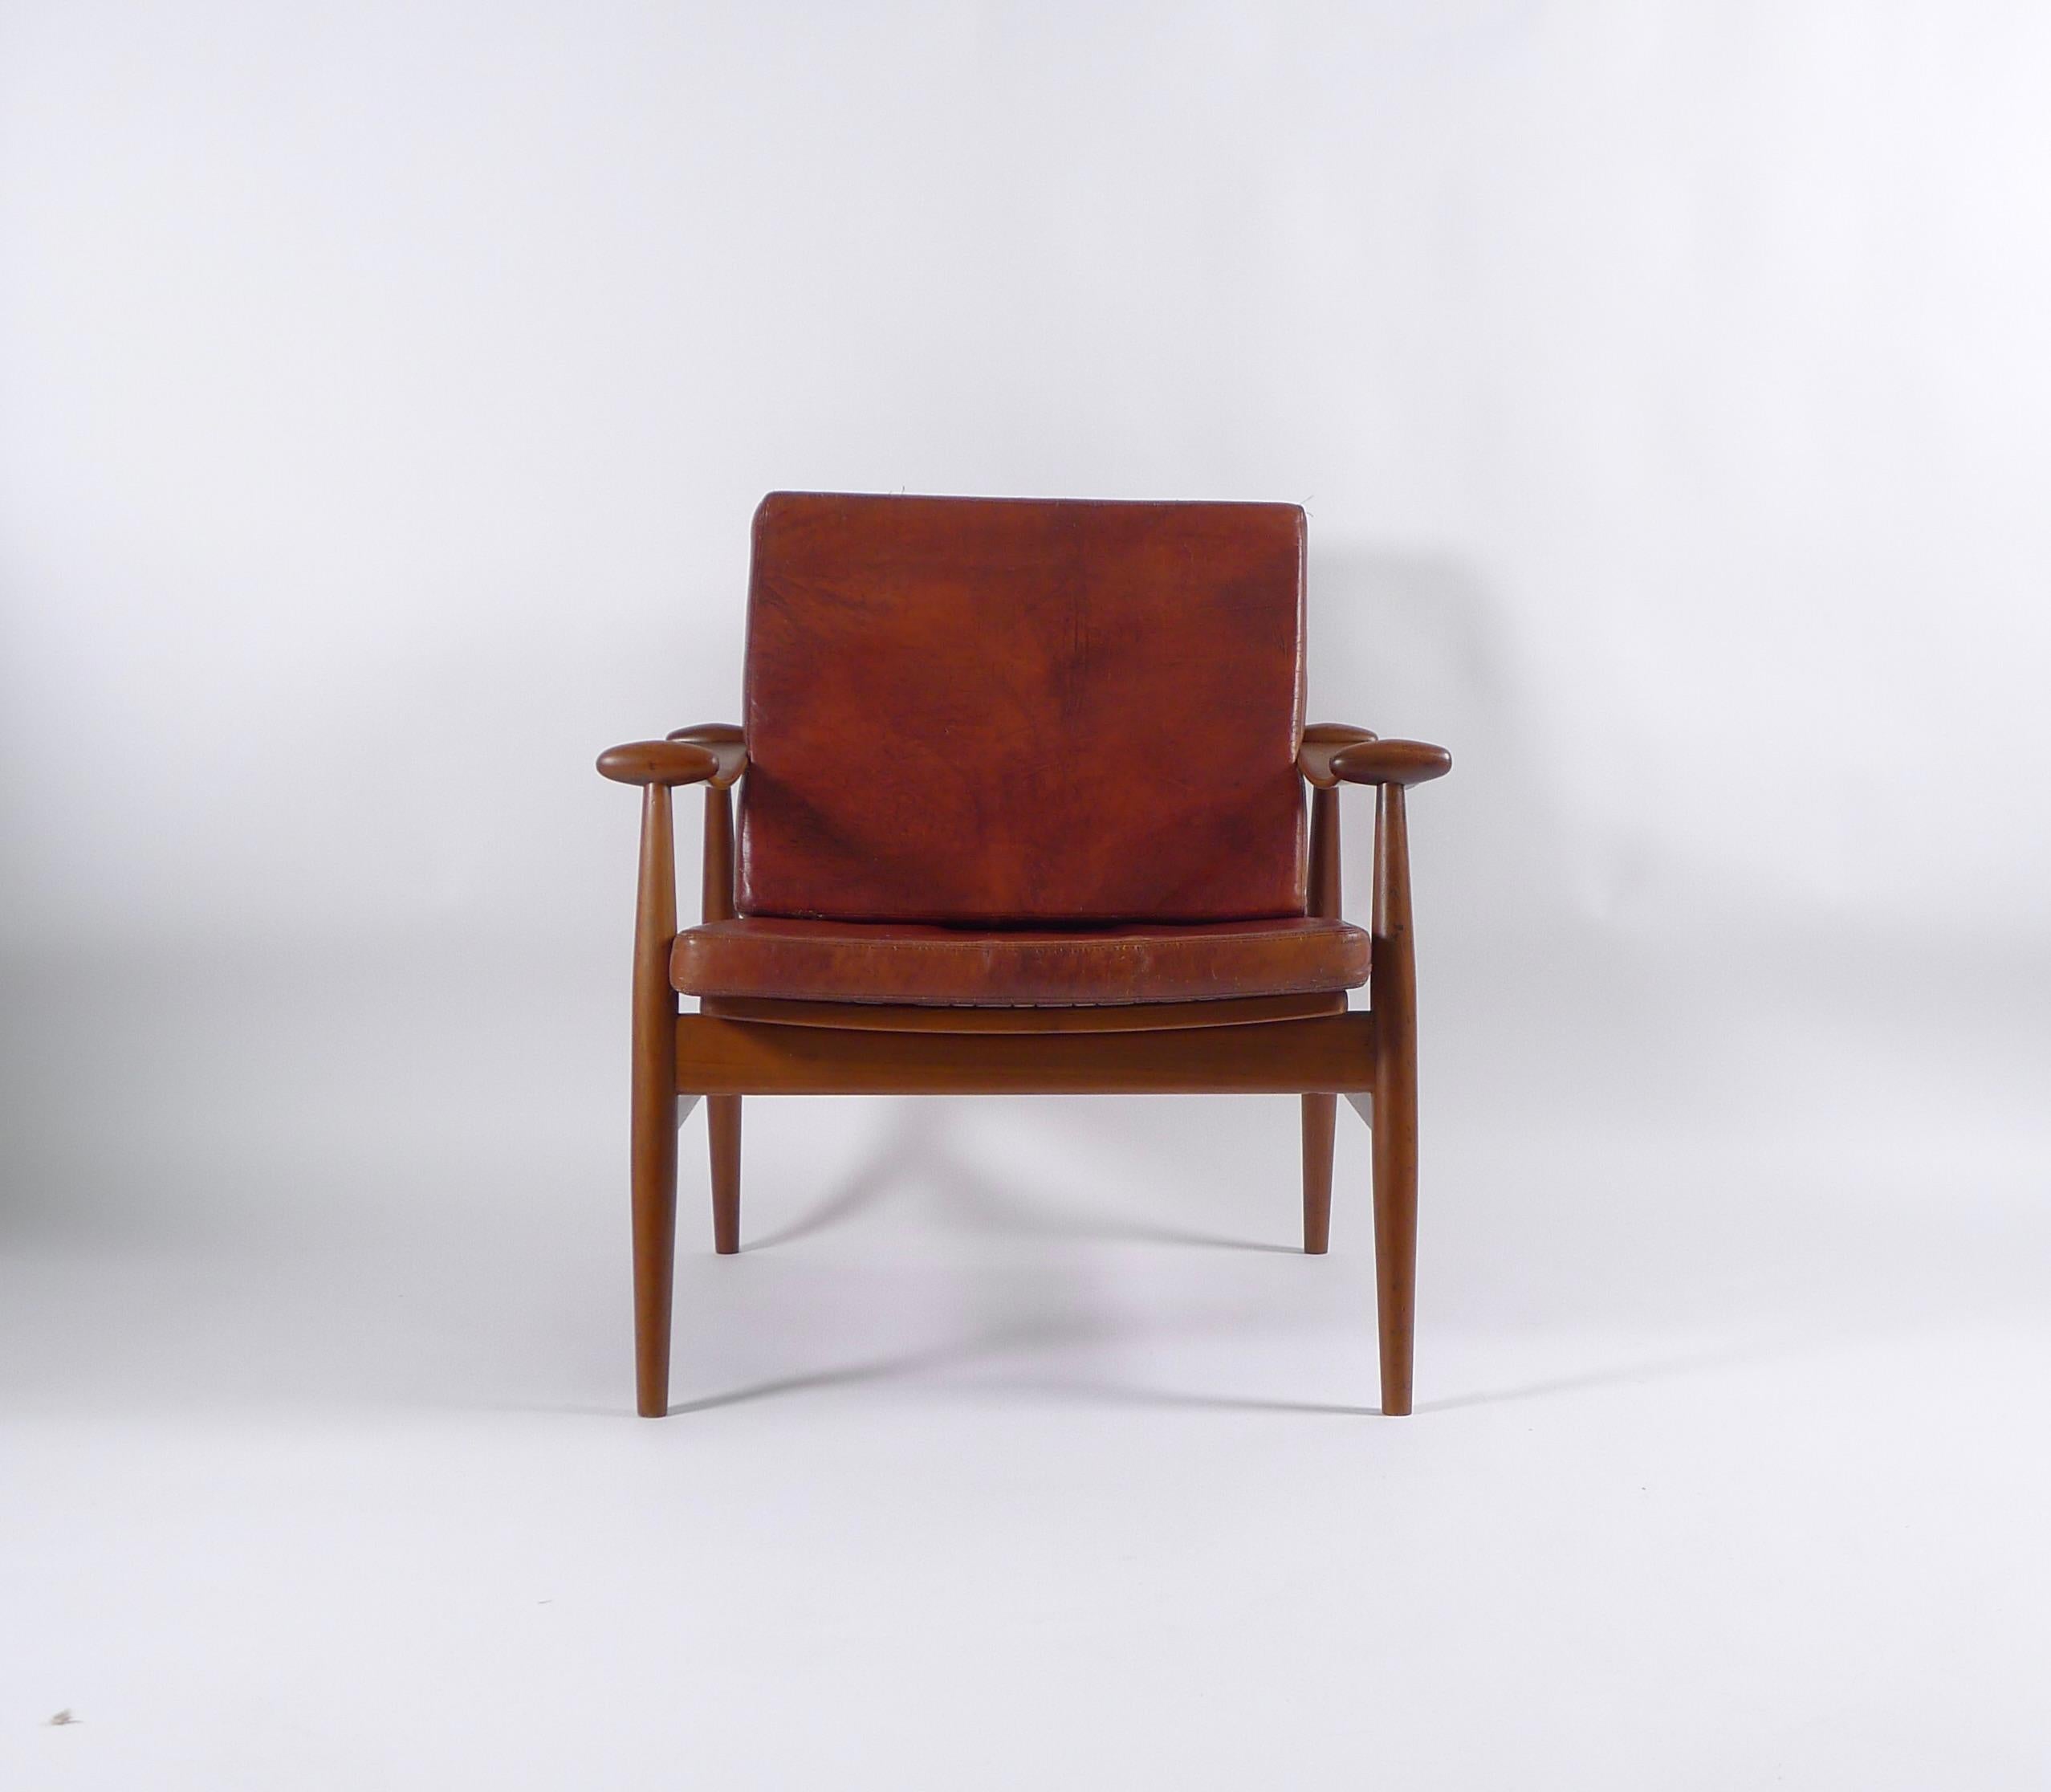 Finn Juhl Spade Chair, Model Fd133, 1950s, Produced by France & Son, with Label 1